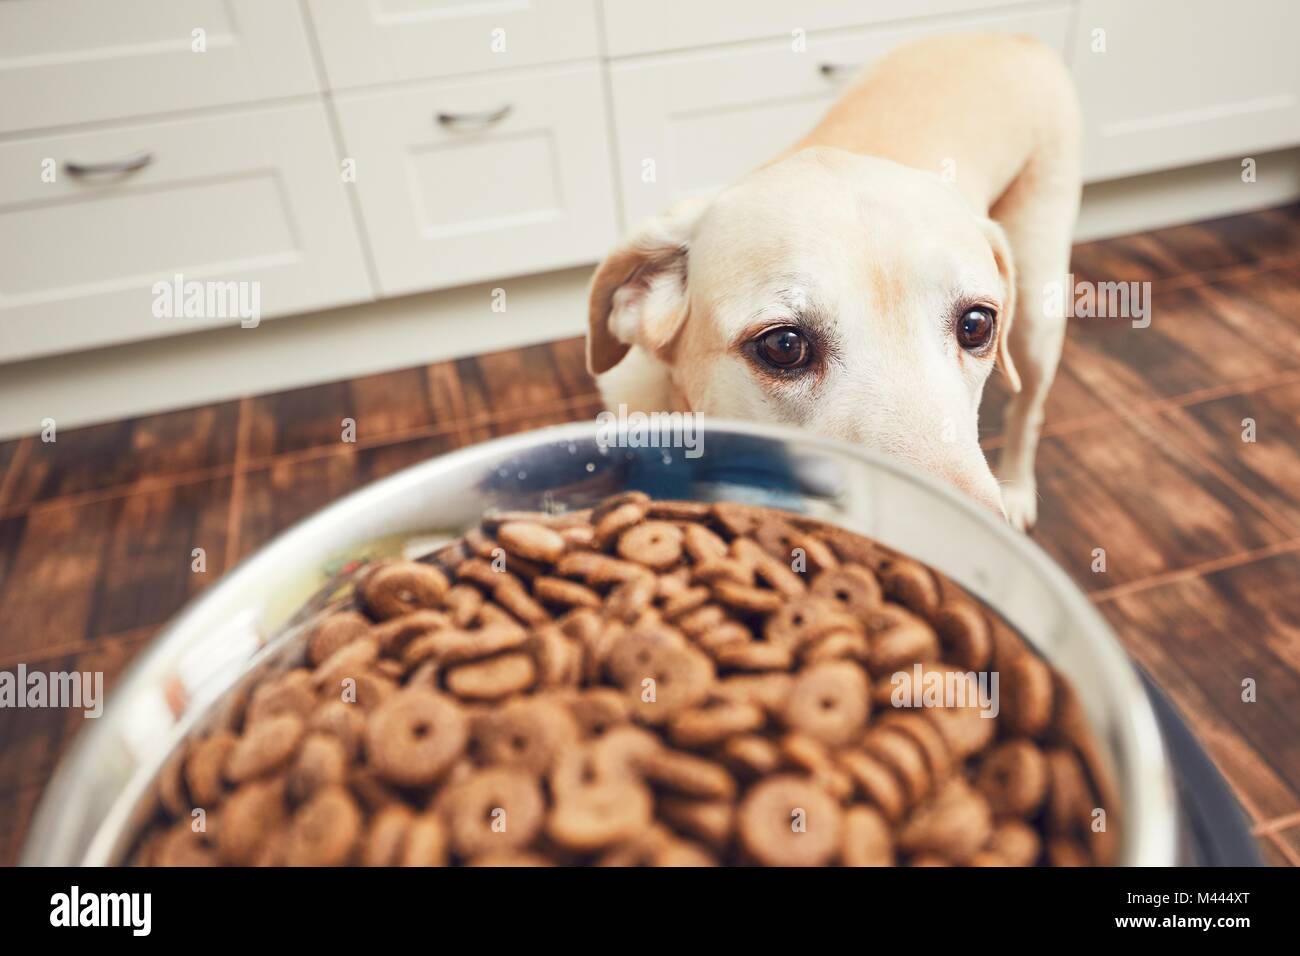 Domestic life with pet. Feeding hungry labrador retriever. The owner gives his dog a bowl of granules. Stock Photo